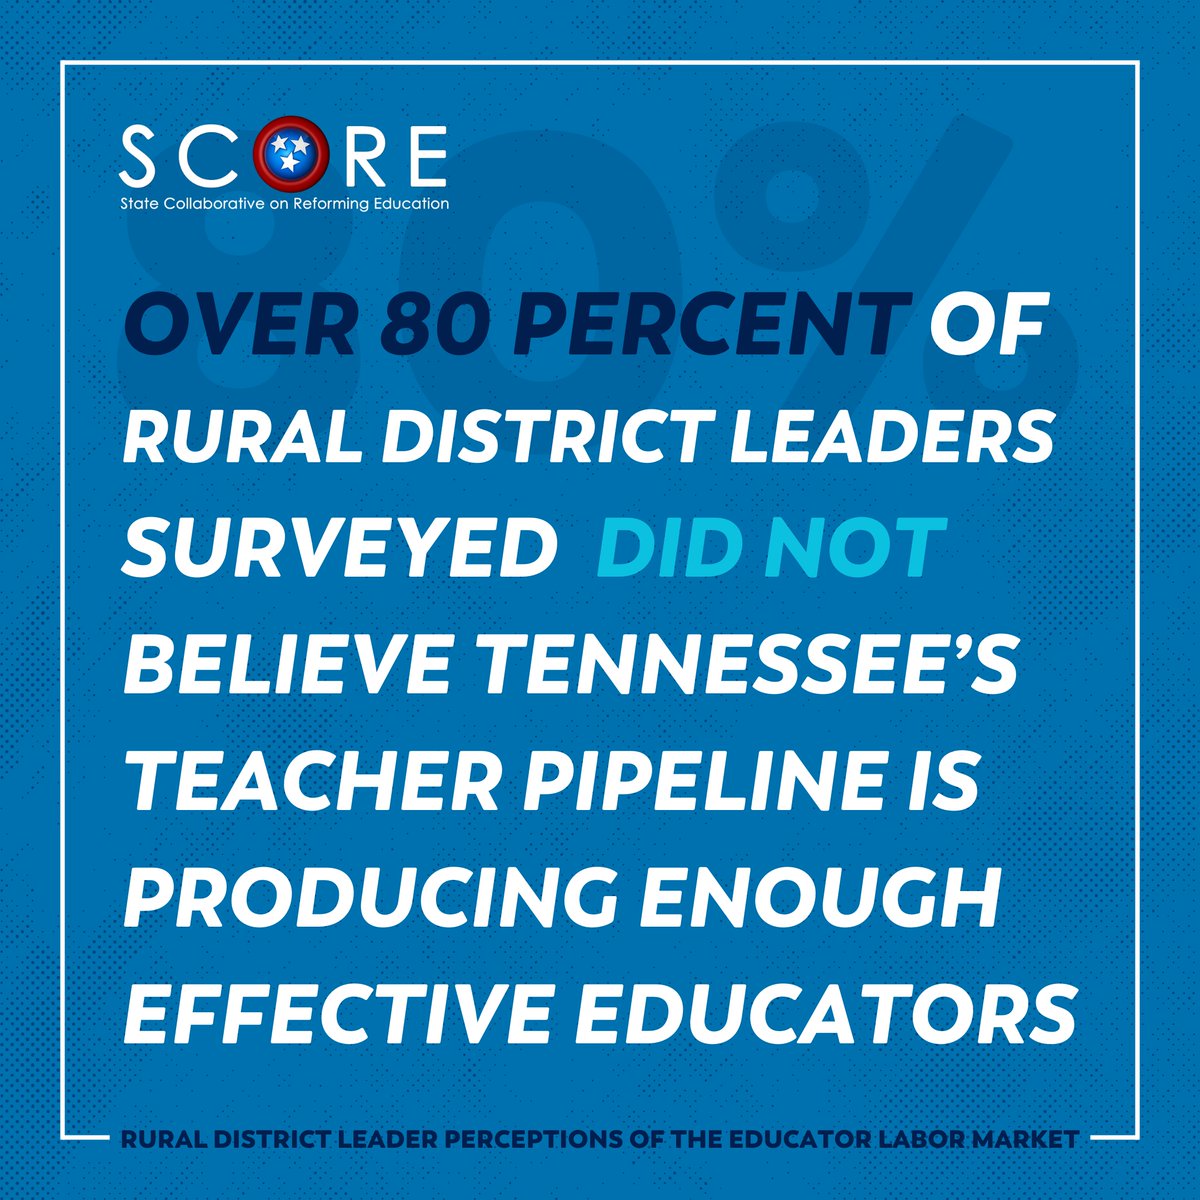 Rural districts play a large role in TN's education landscape. Our new report reveals challenges rural district leaders face as they recruit and retain educators & provides new data to build evidence-based supports for TN's educator labor market. tnscore.org/resources/stre…